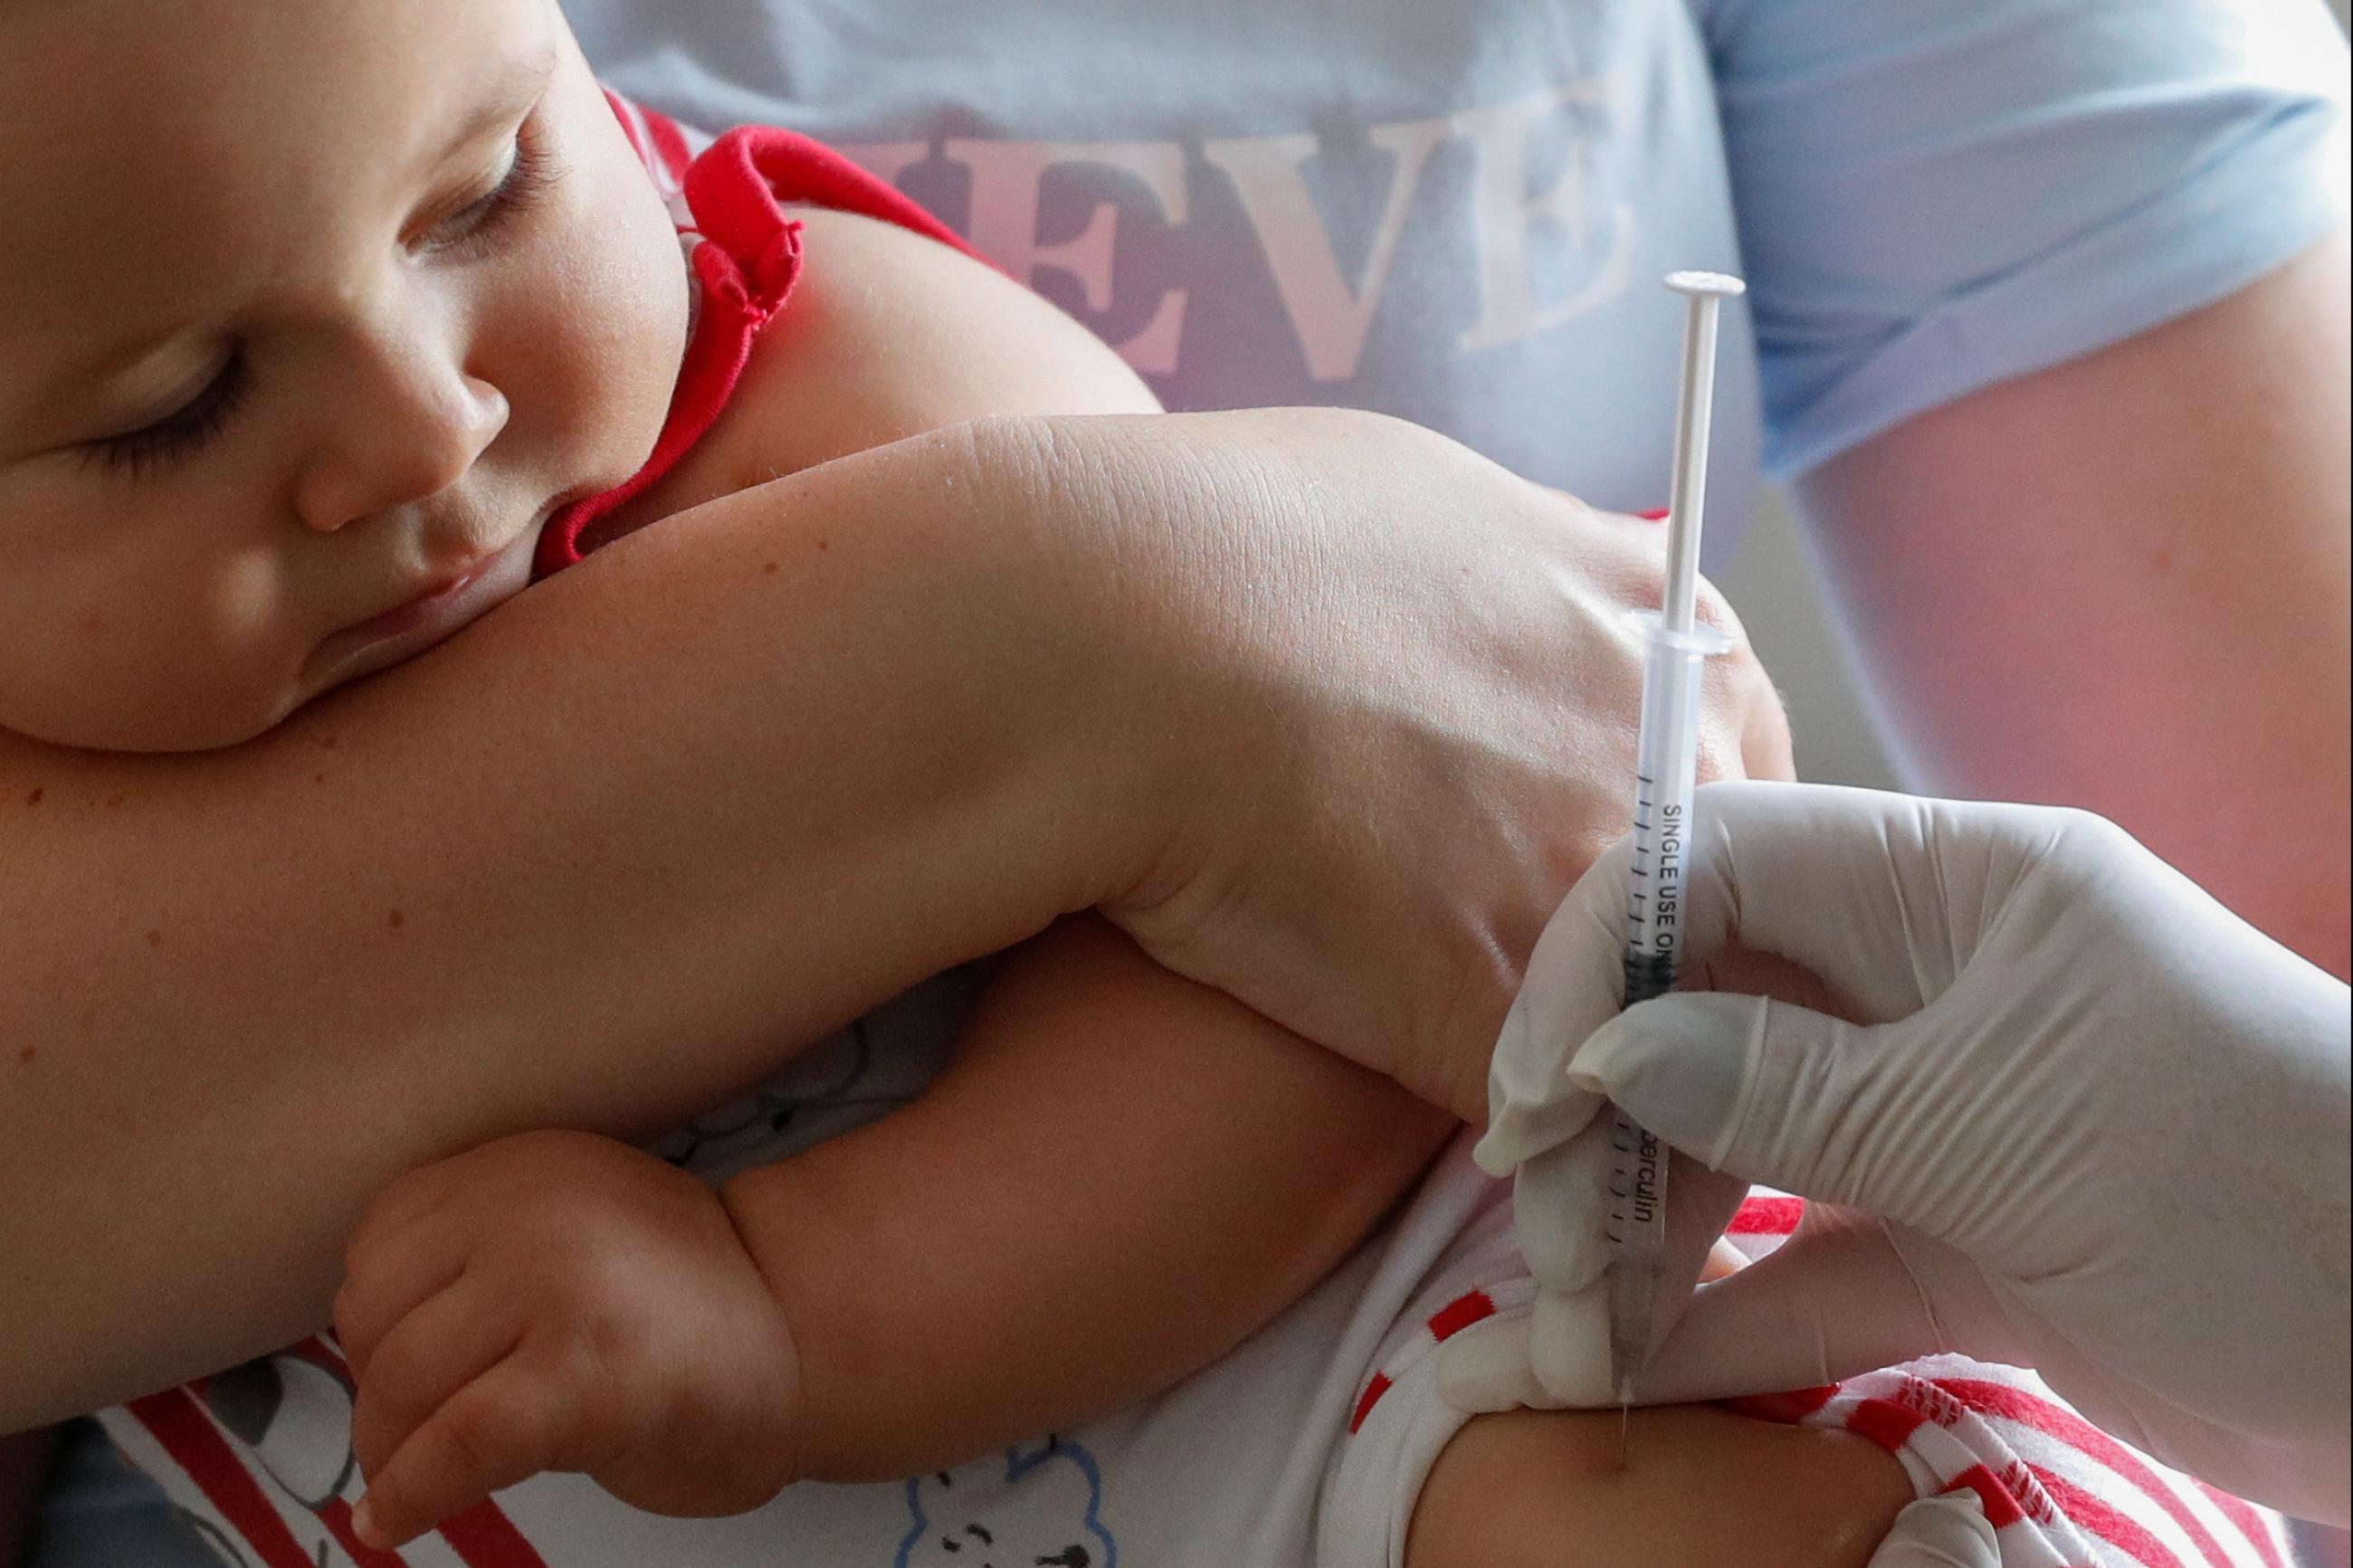 A baby receives a vaccine injection at a children's clinic in Kiev, Ukraine, on August 14, 2019.  Photo by REUTERS/Valentyn Ogirenko